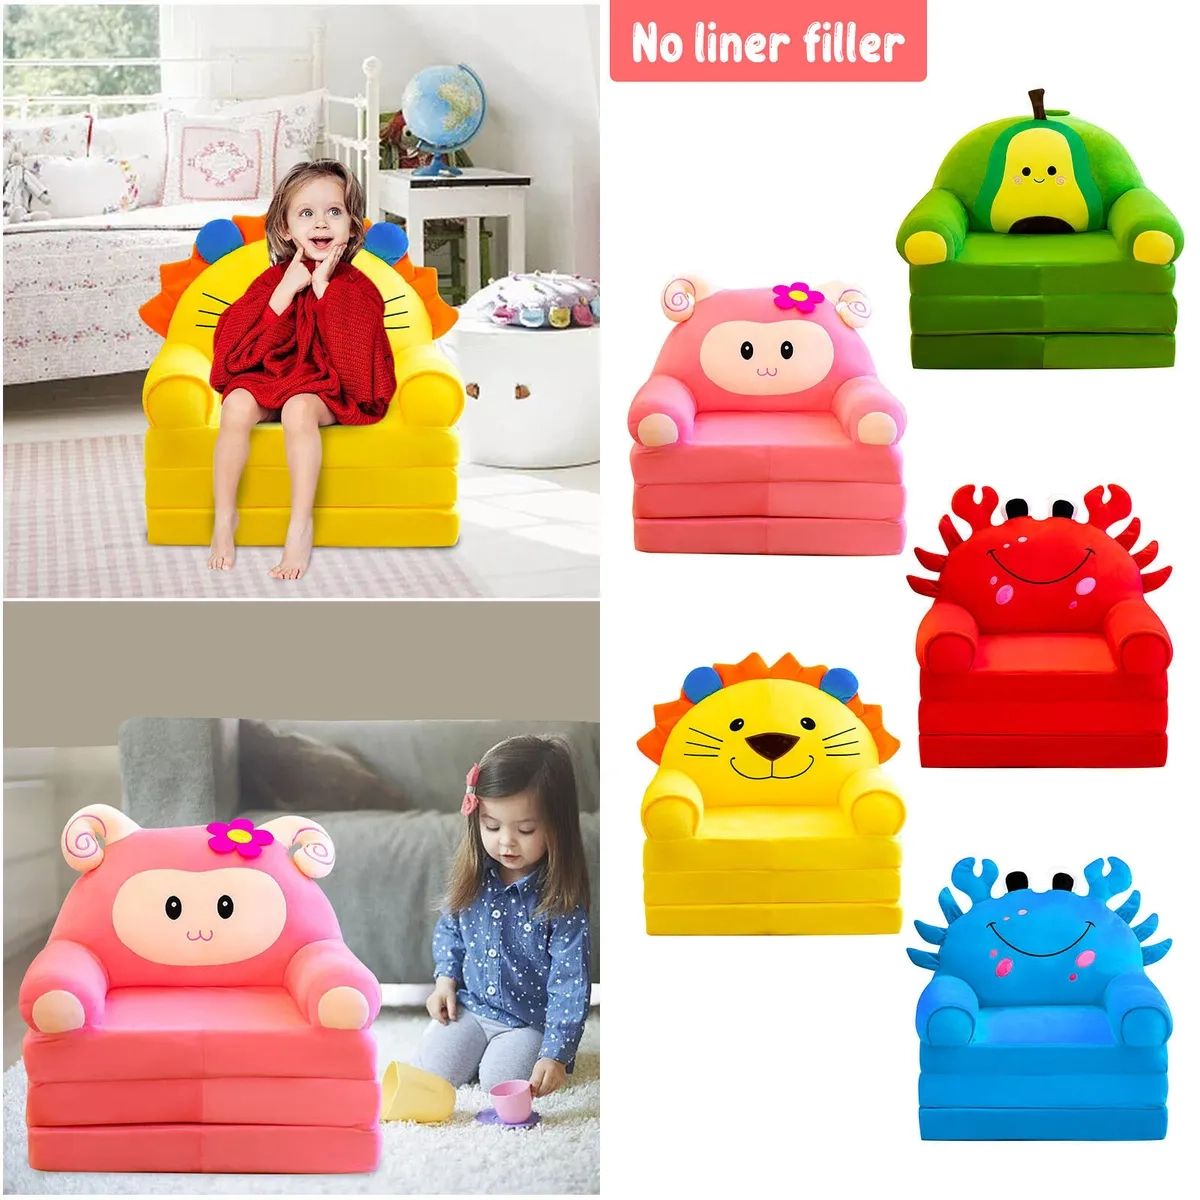 Plush Foldable Kids Sofa Backrest Armchair 2 In 1 Foldable Without Liner  Filler | Ebay In 2 In 1 Foldable Sofas (View 13 of 15)